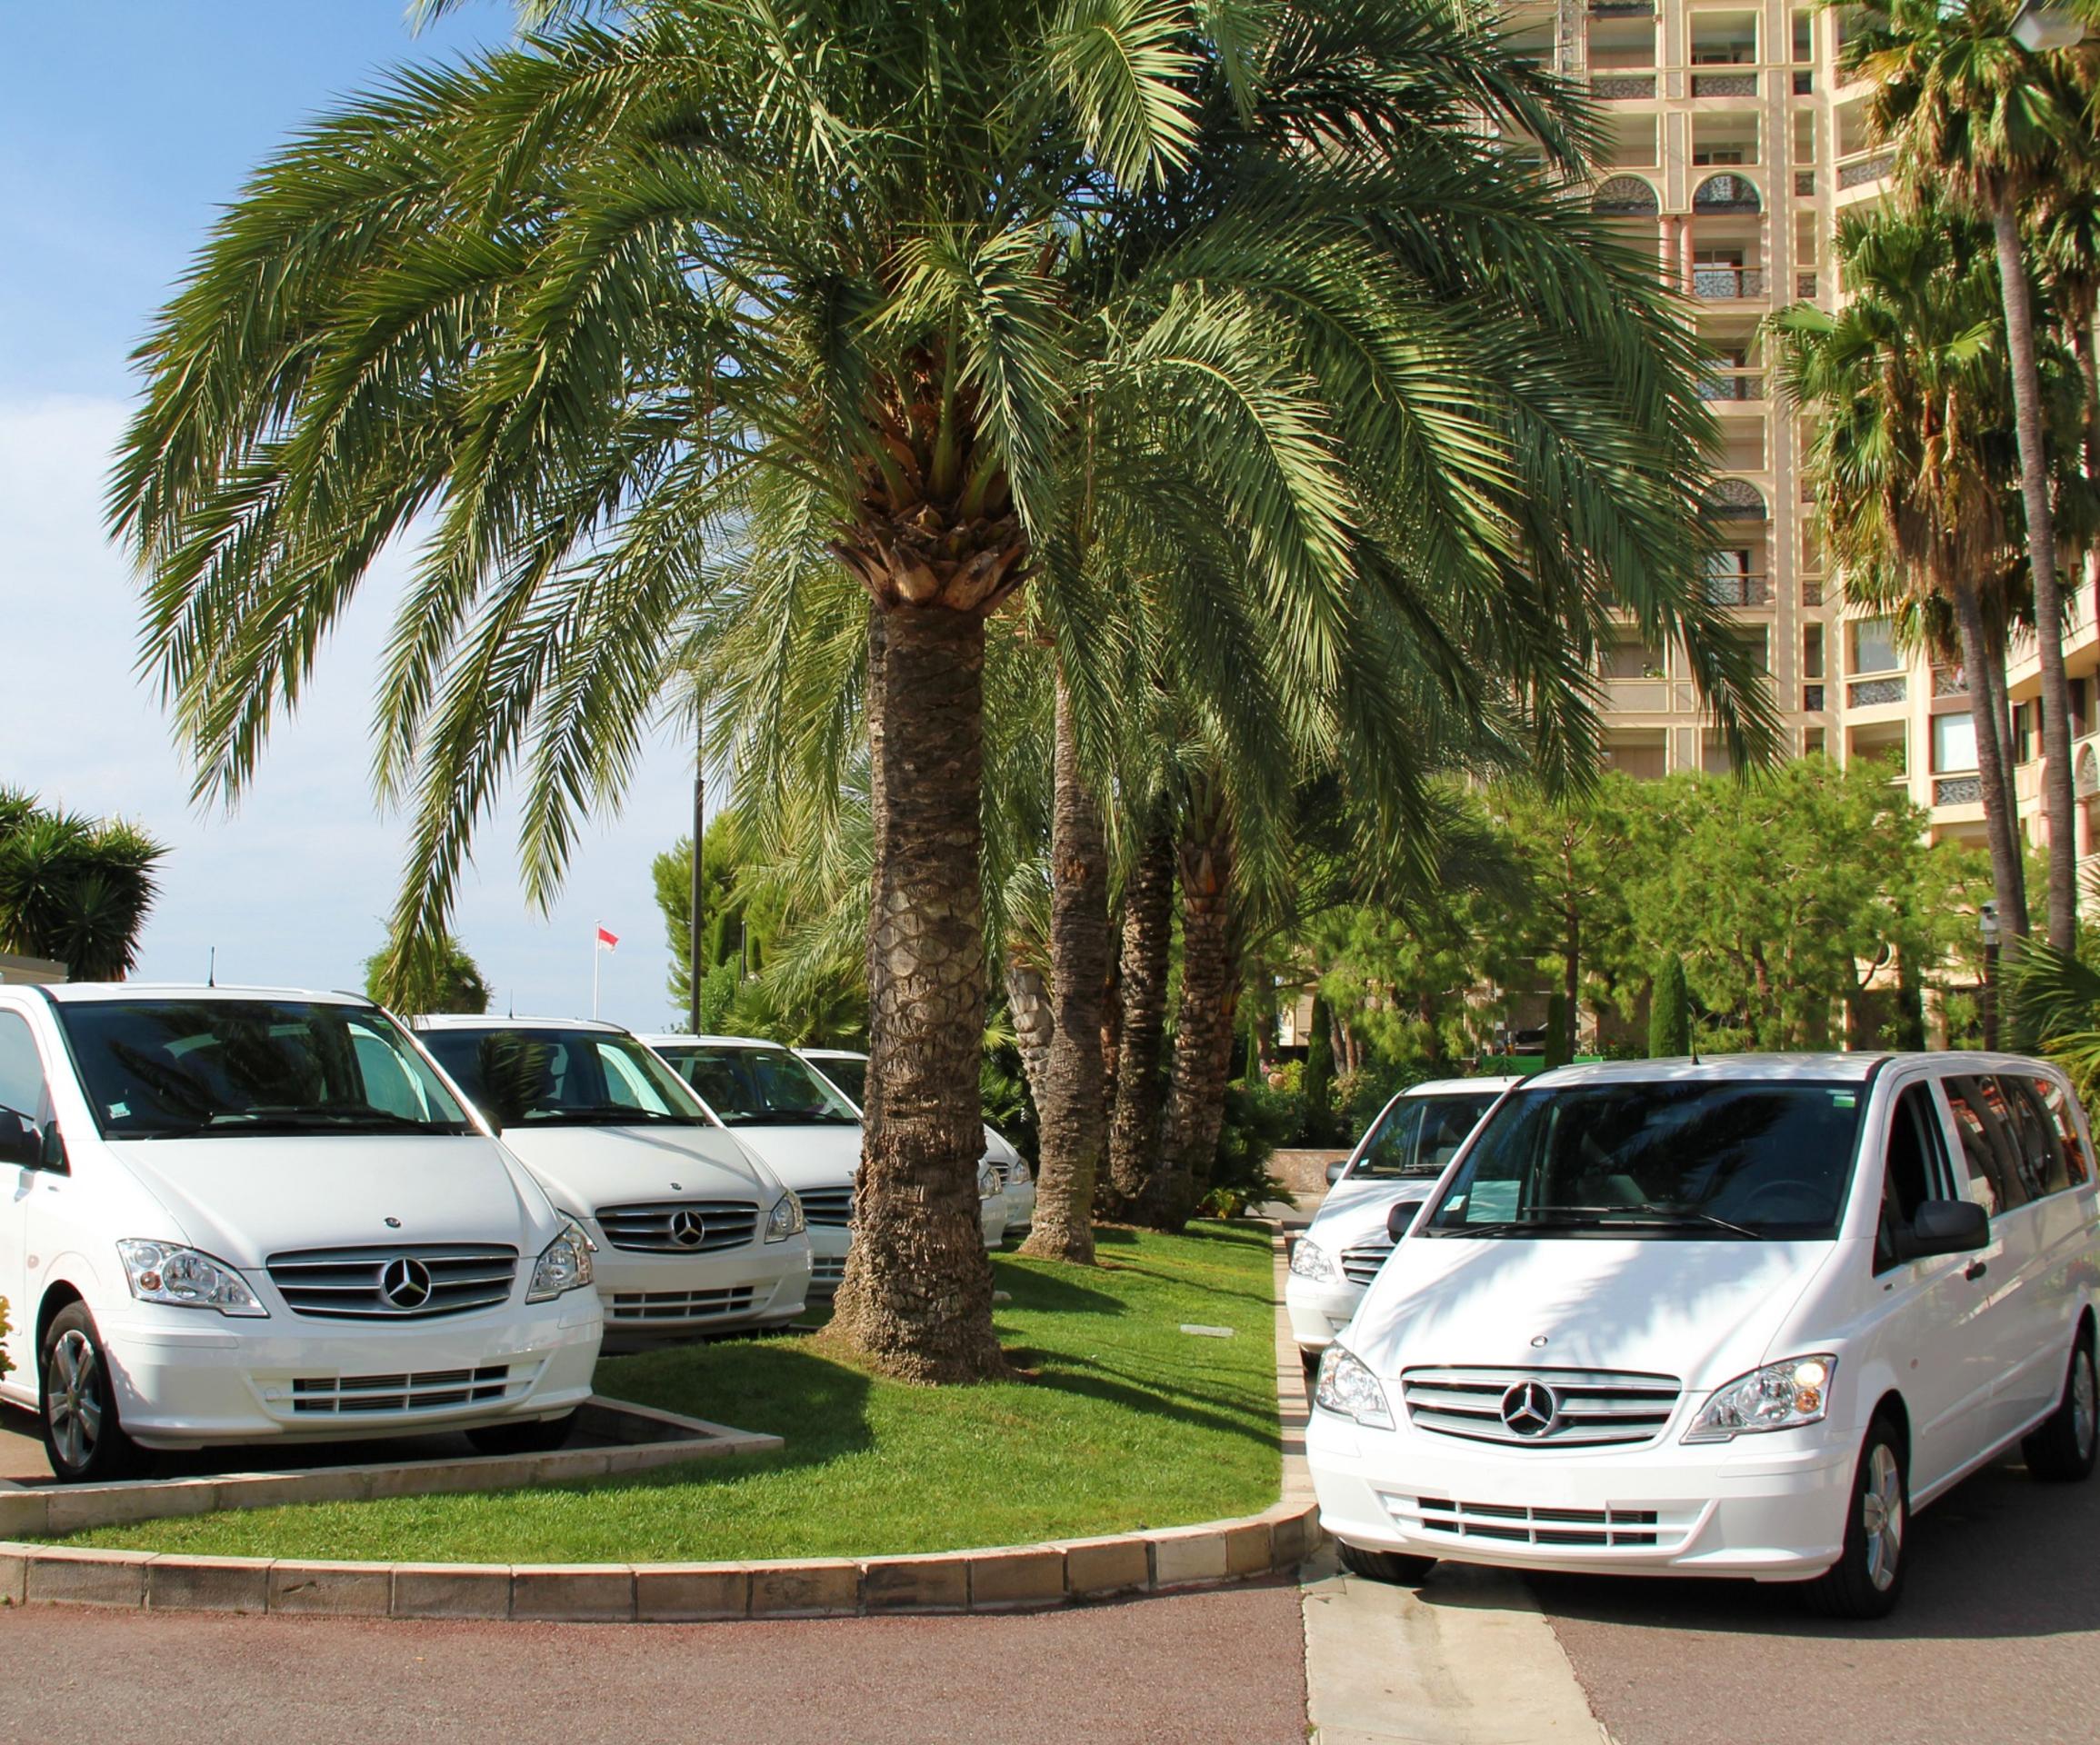 Daytime transfer by private vehicle from Nice and Nice airport to Monaco